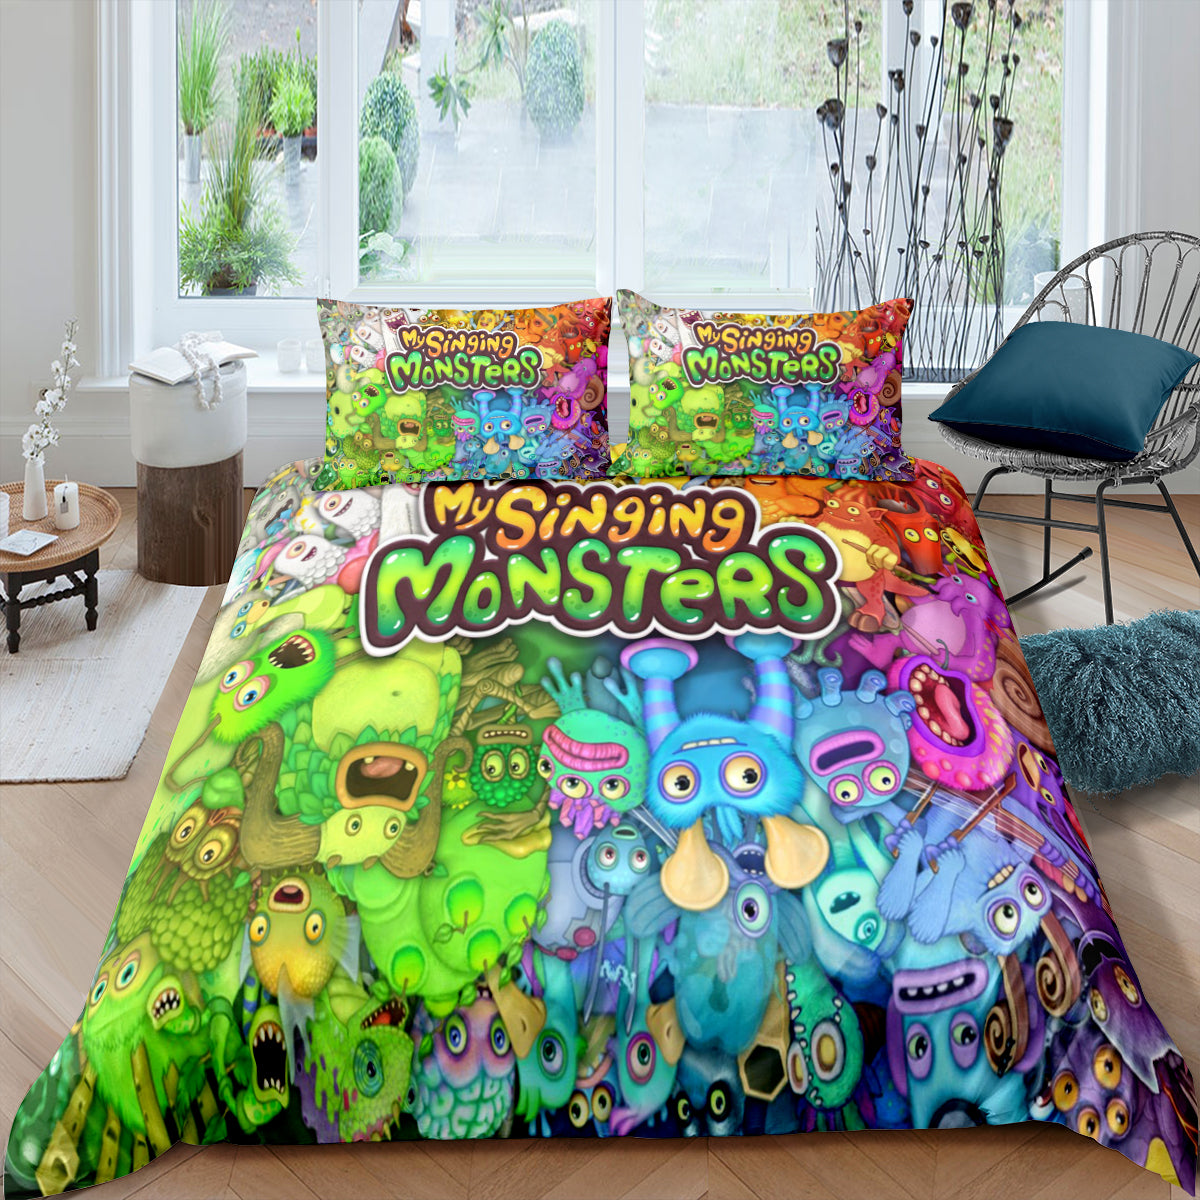 My Singing Monsters #2 3D Printed Duvet Cover Quilt Cover Pillowcase Bedding Set Bed Linen Home Decor